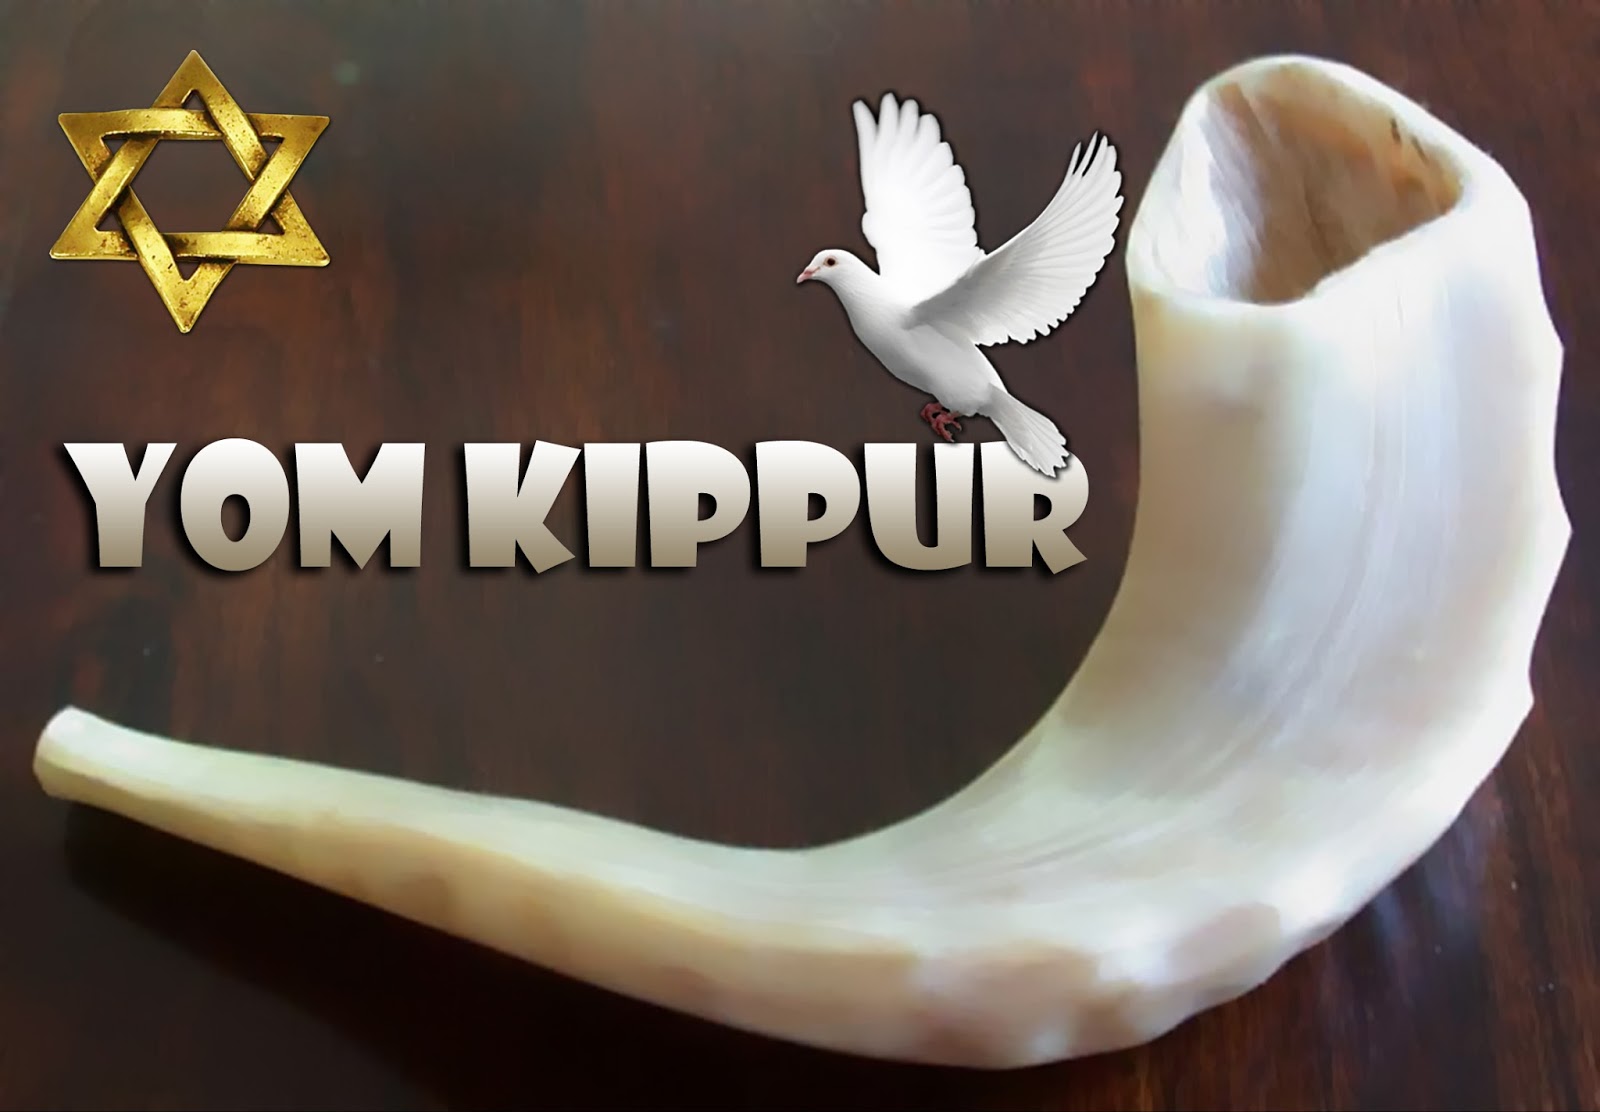 Yom Kippur Images And Quotes. QuotesGram